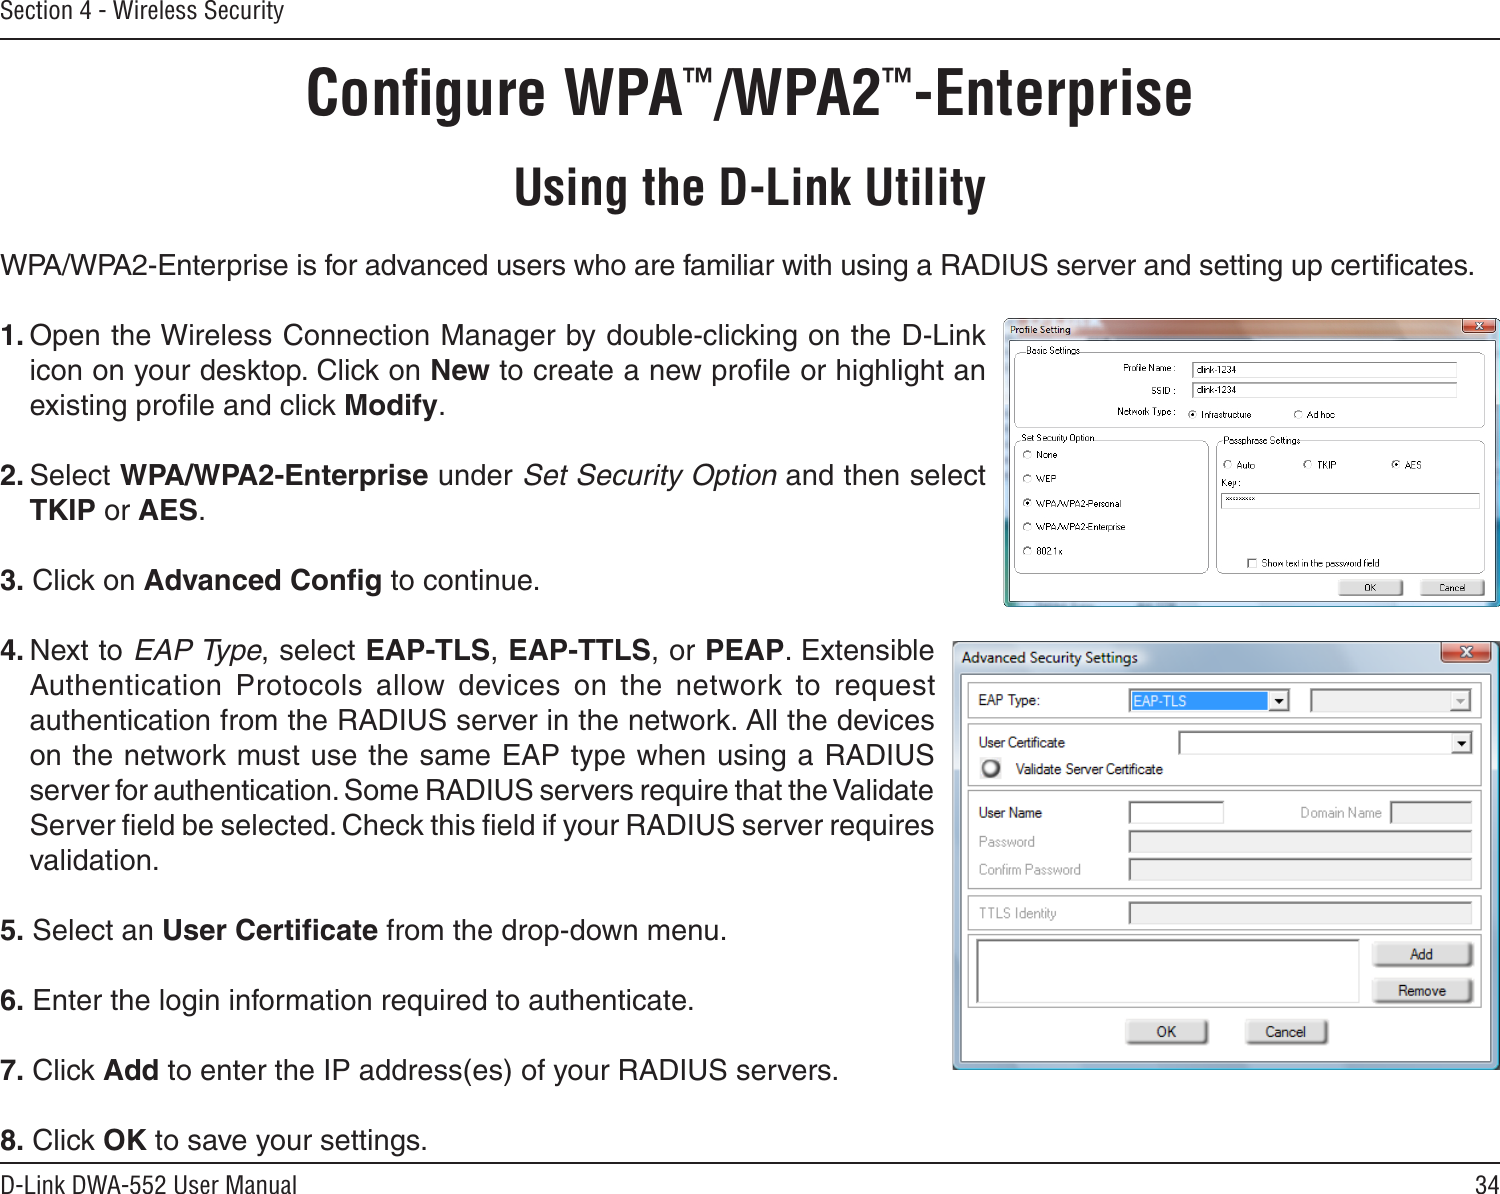 34D-Link DWA-552 User ManualSection 4 - Wireless SecurityConﬁgure WPA™/WPA2™-EnterpriseUsing the D-Link UtilityWPA/WPA2-Enterprise is for advanced users who are familiar with using a RADIUS server and setting up certiﬁcates.1. Open the Wireless Connection Manager by double-clicking on the D-Link icon on your desktop. Click on New to create a new proﬁle or highlight an existing proﬁle and click Modify. 2. Select WPA/WPA2-Enterprise under Set Security Option and then select TKIP or AES.3. Click on Advanced Conﬁg to continue.4. Next to EAP Type, select EAP-TLS, EAP-TTLS, or PEAP. Extensible Authentication  Protocols  allow  devices  on  the  network  to  request authentication from the RADIUS server in the network. All the devices on the network must use the same EAP type when using a RADIUS server for authentication. Some RADIUS servers require that the Validate Server ﬁeld be selected. Check this ﬁeld if your RADIUS server requires validation.5. Select an User Certiﬁcate from the drop-down menu.6. Enter the login information required to authenticate.7. Click Add to enter the IP address(es) of your RADIUS servers.8. Click OK to save your settings.